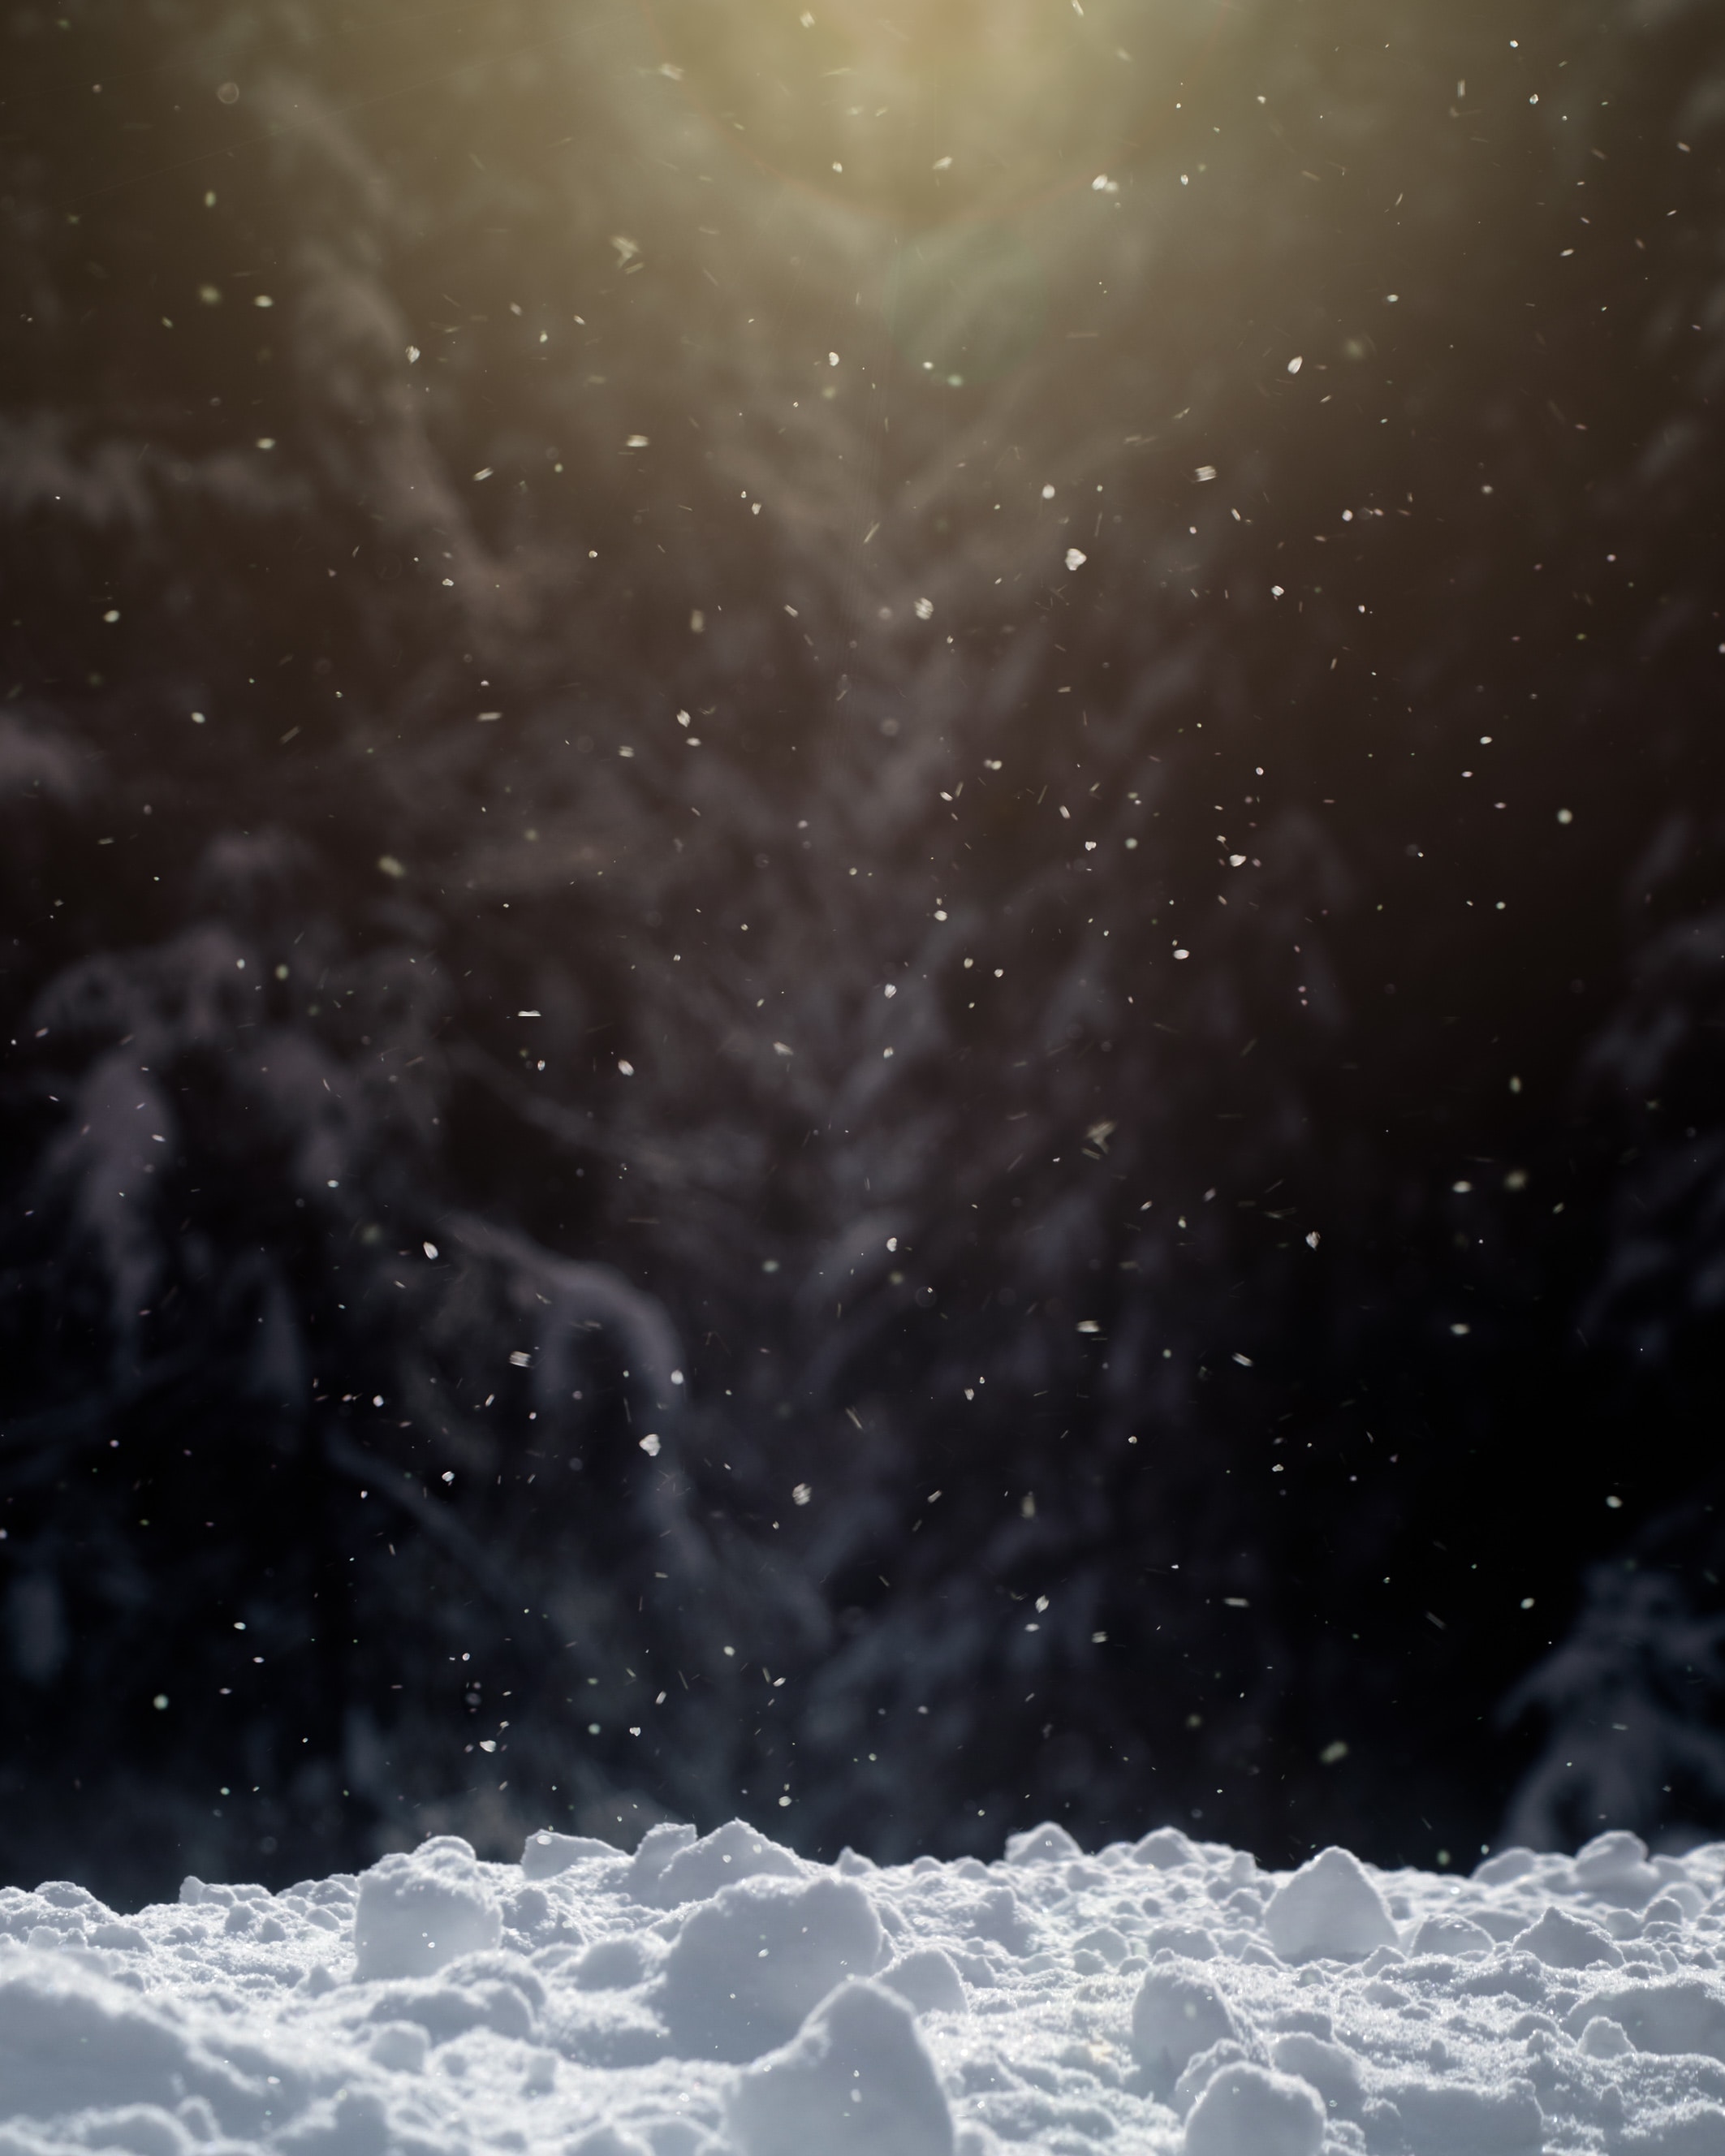 snowfall, snowflakes, winter, nature, snow High Definition image